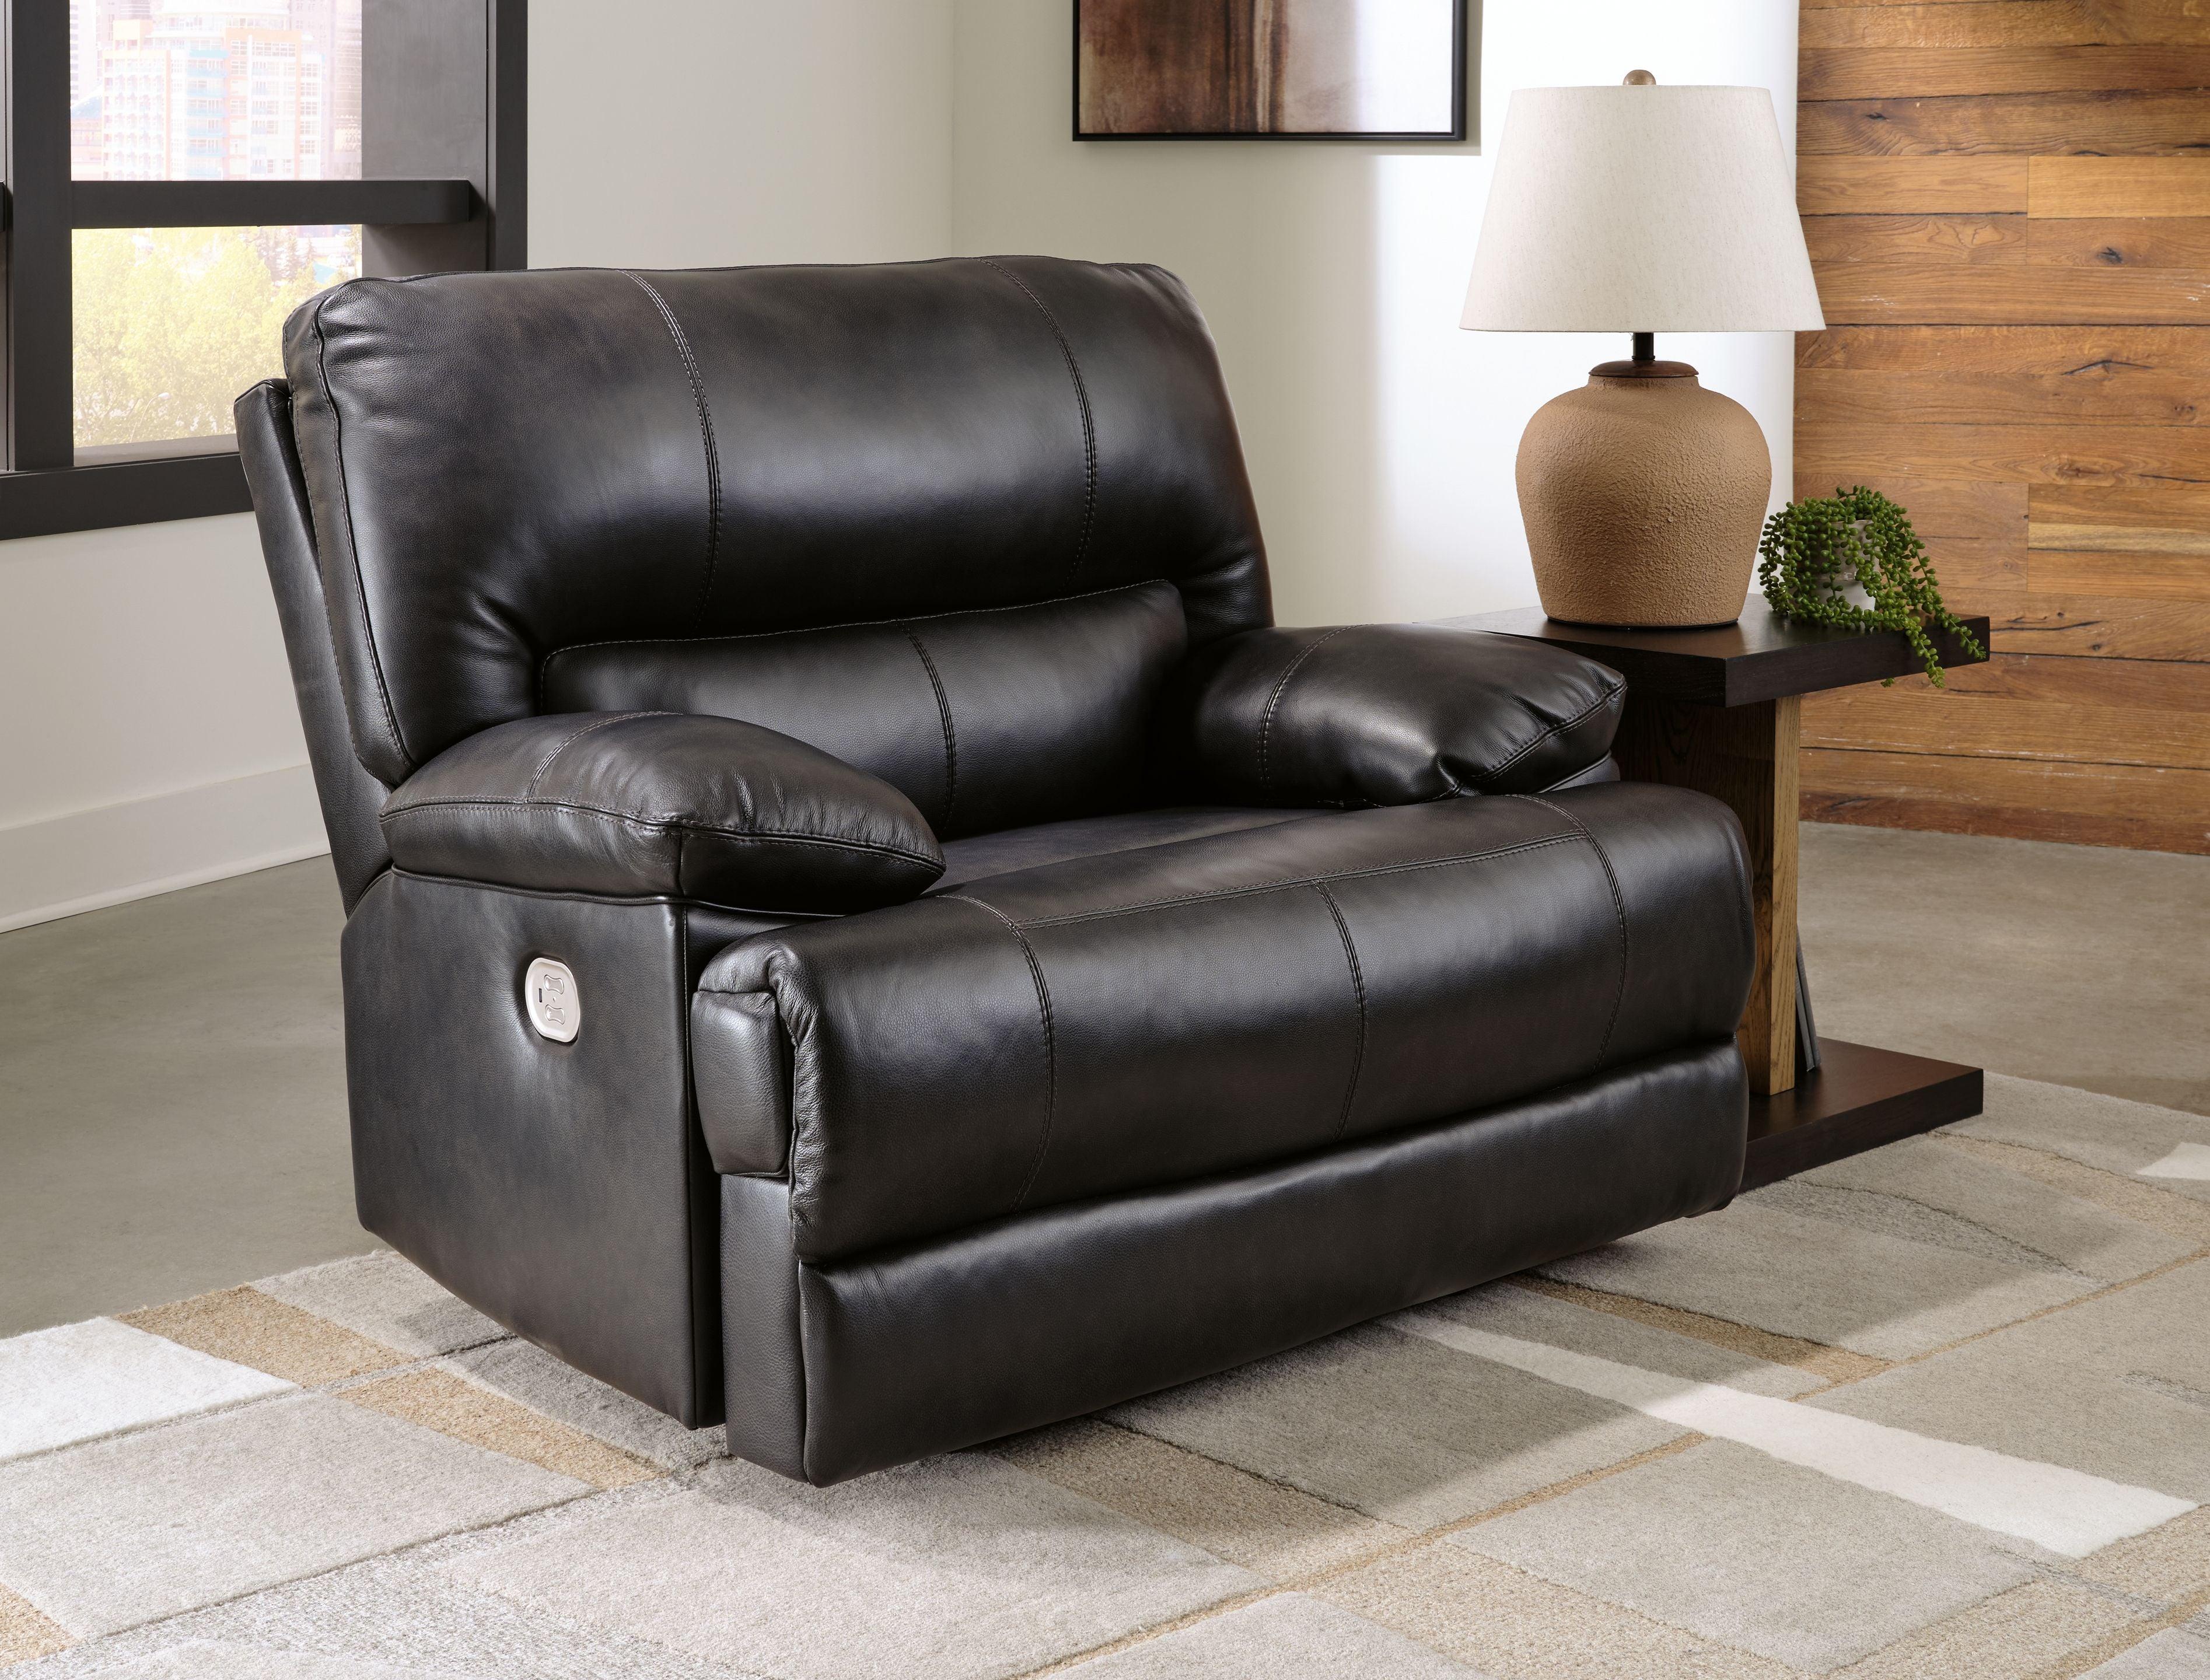 Signature Design by Ashley® - Mountainous - Eclipse - Power Recliner With Adj Headrest - 5th Avenue Furniture